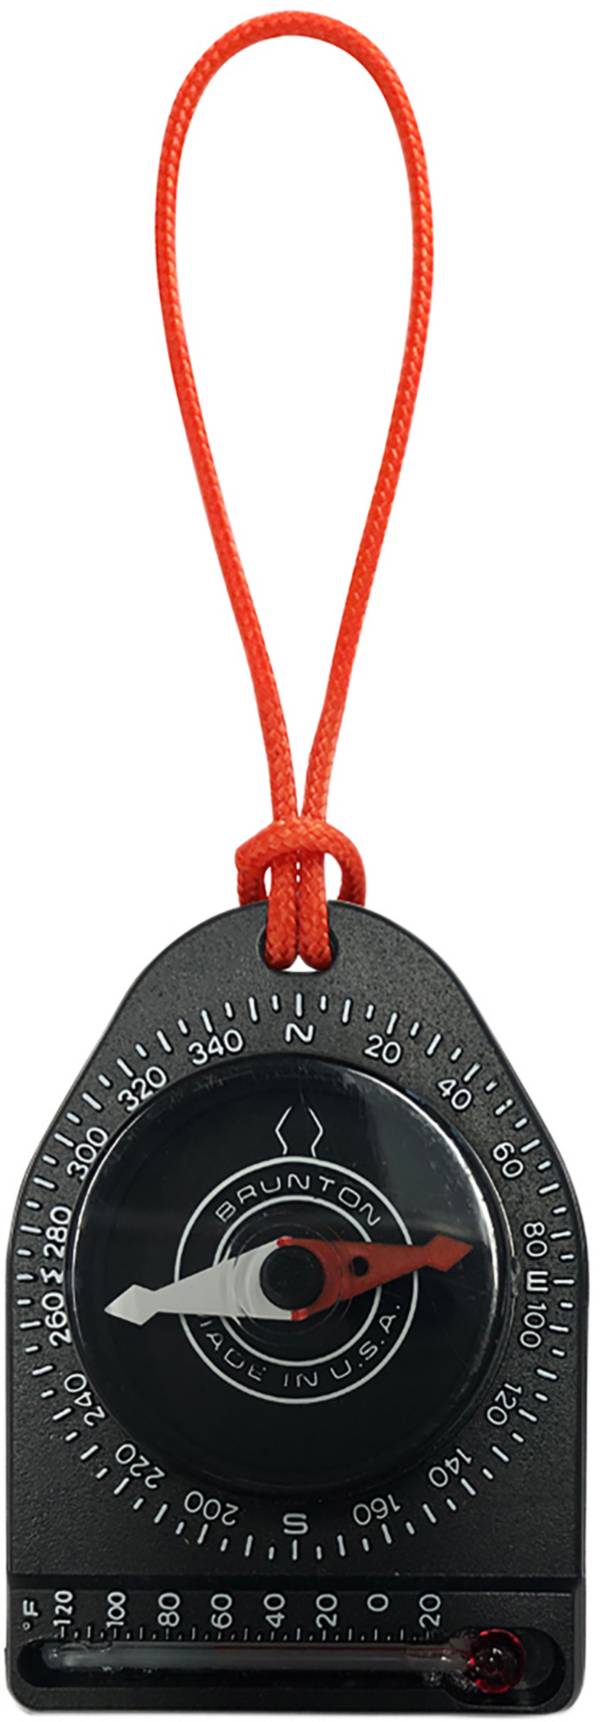 Tag-Along 9045 Chill Compass product image